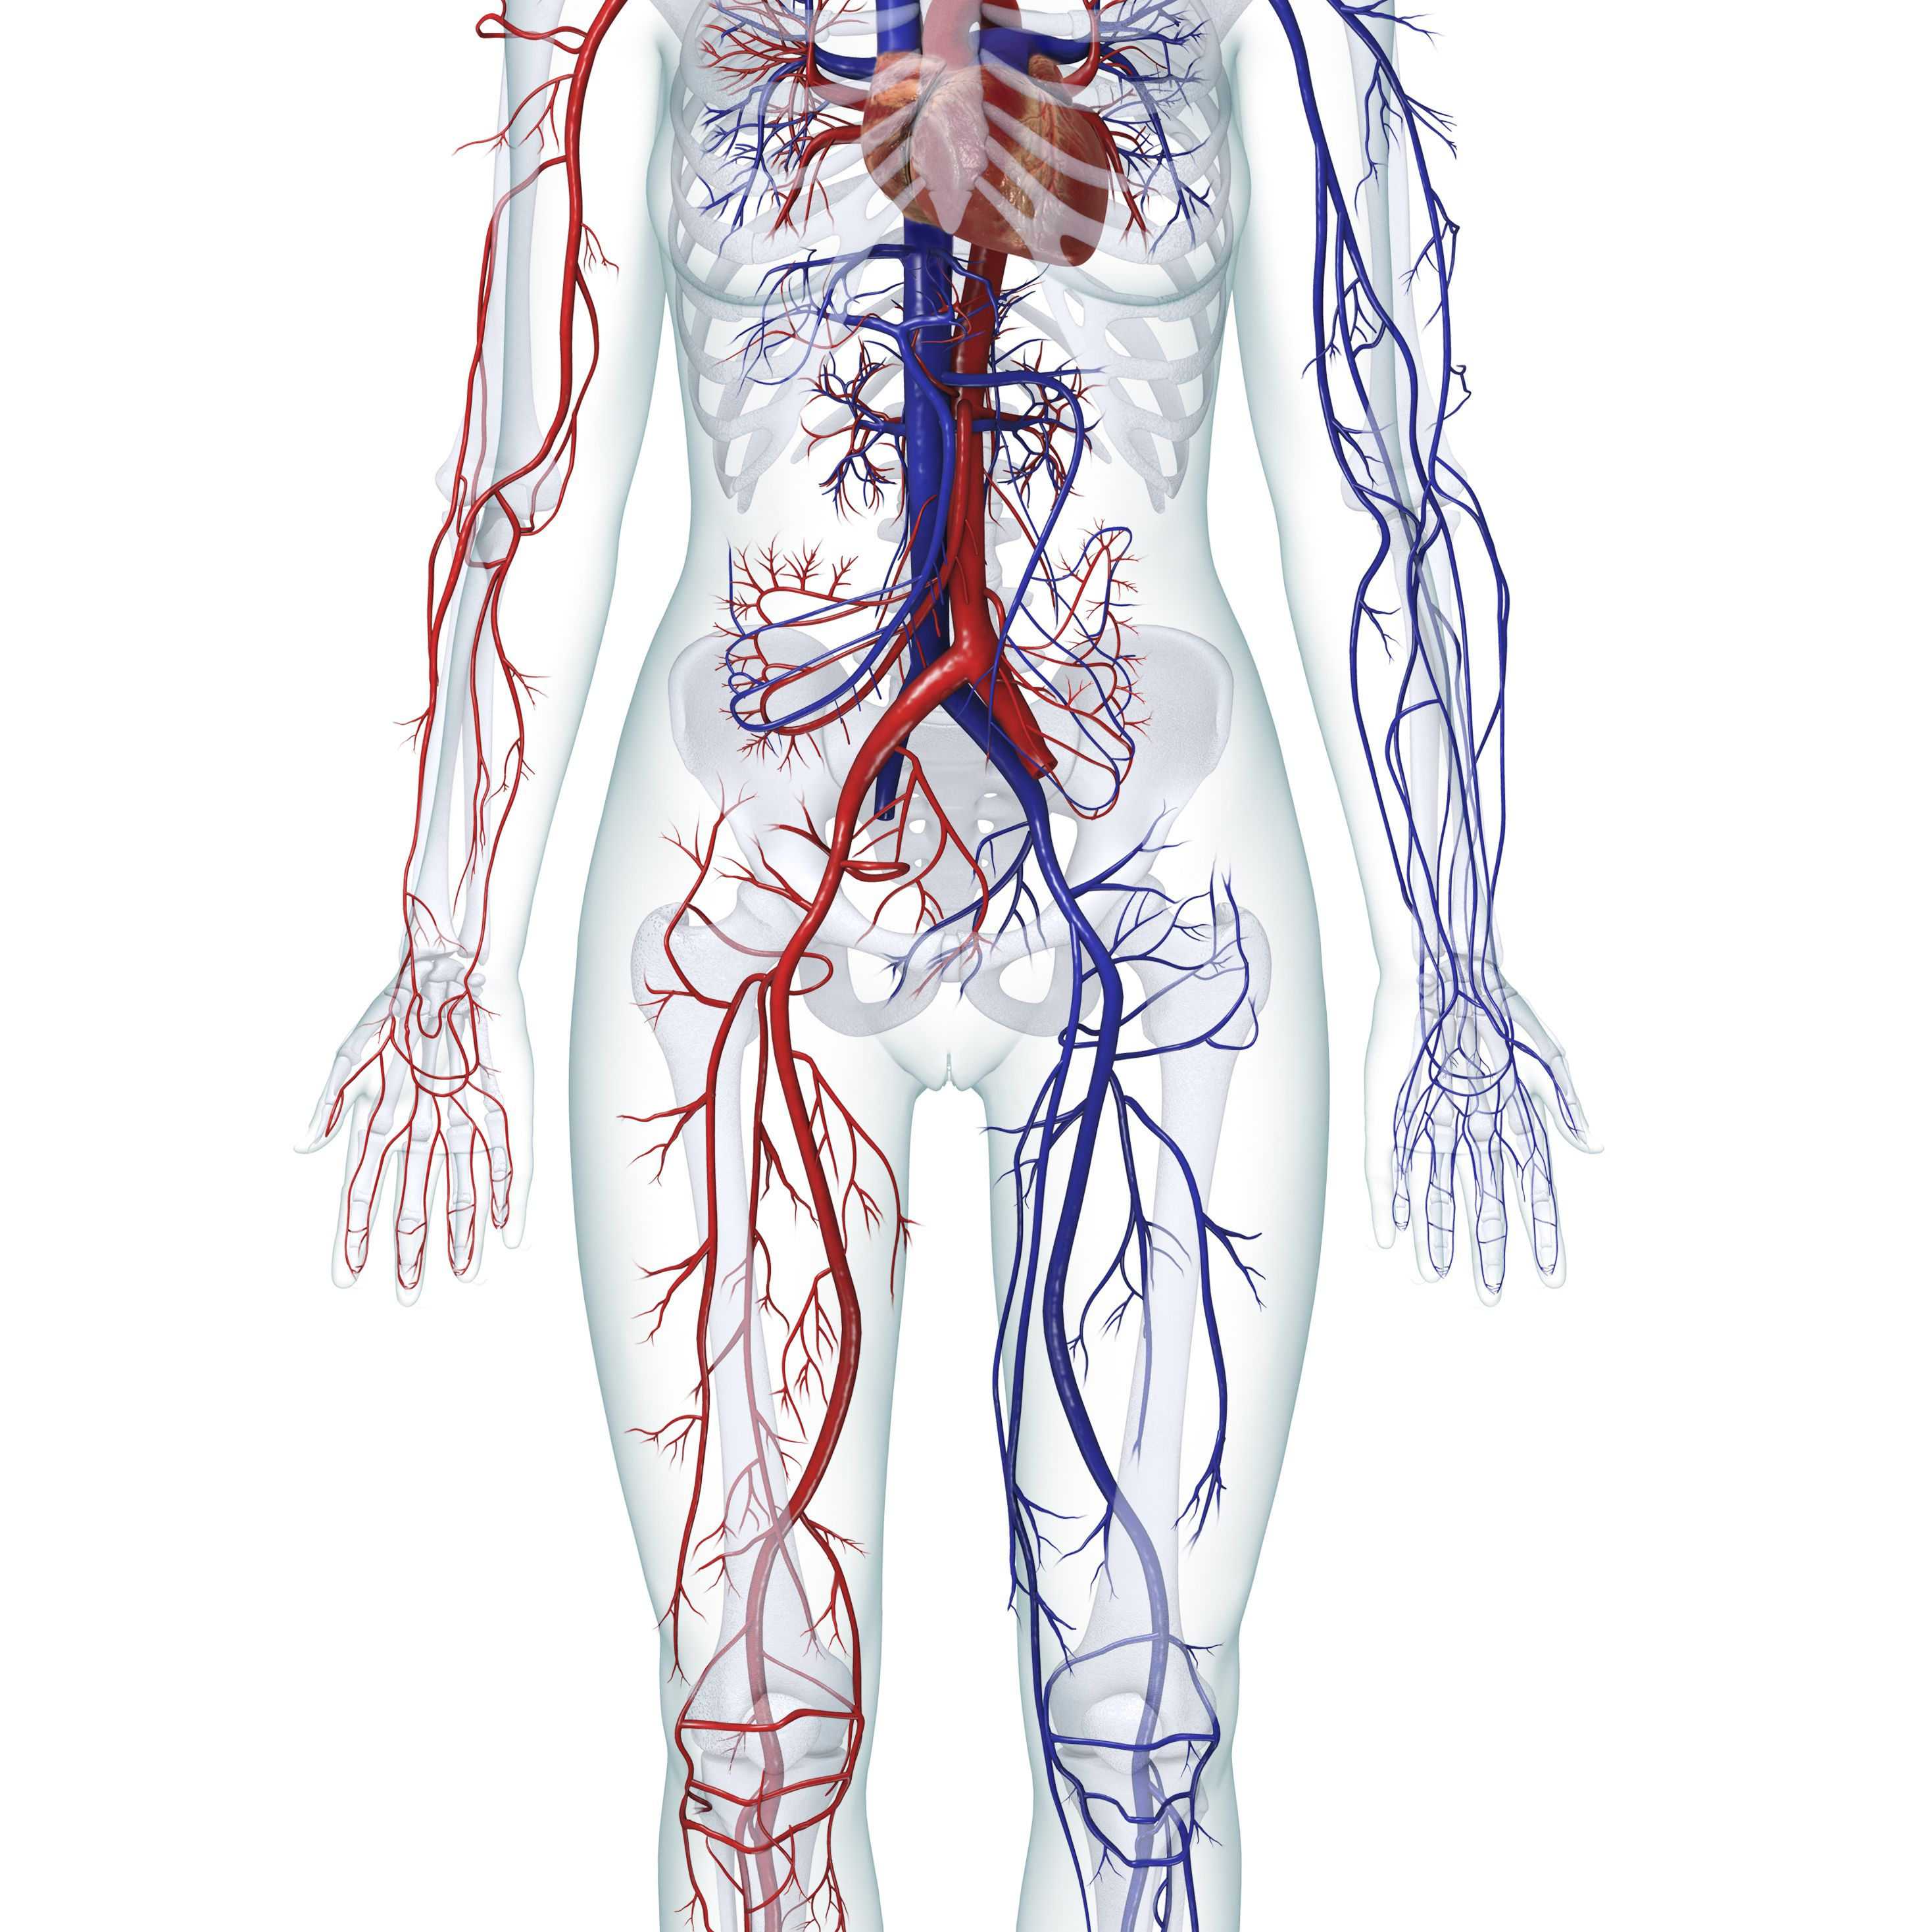 Body Organs Diagram Learn About The Organ Systems In The Human Body